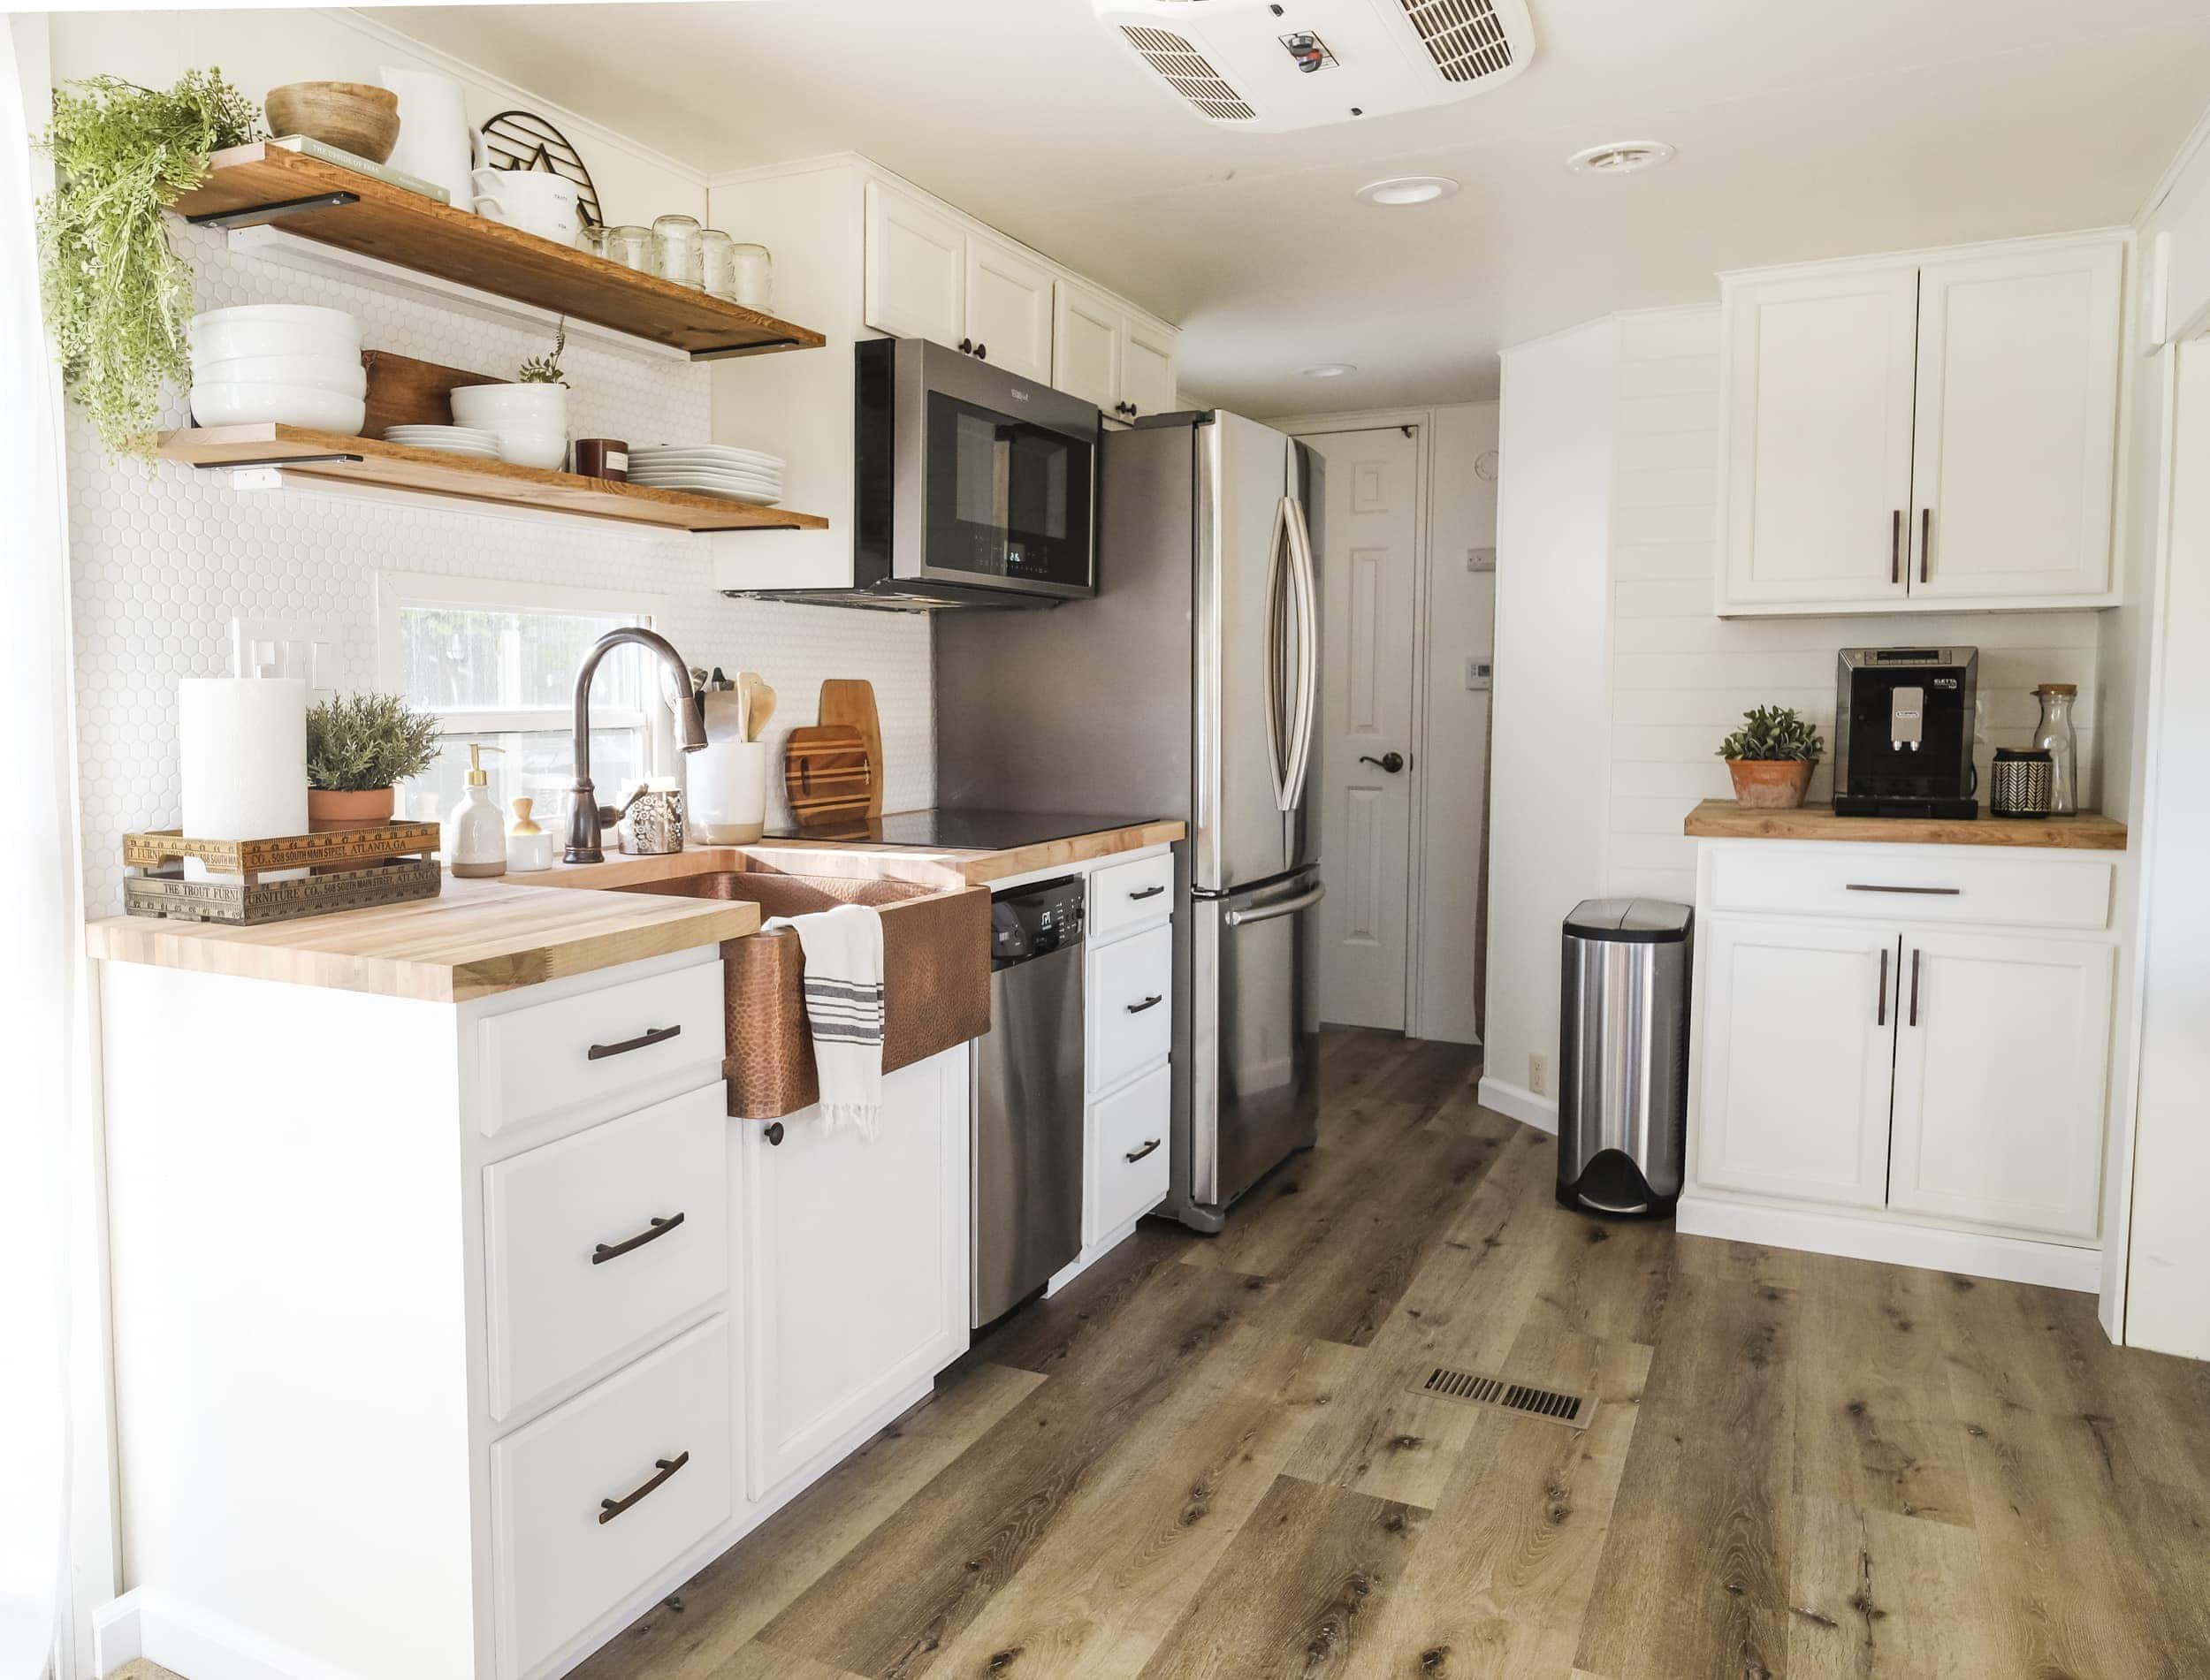 PROJECT OF THE WEEK: A convenient kitchen for campers